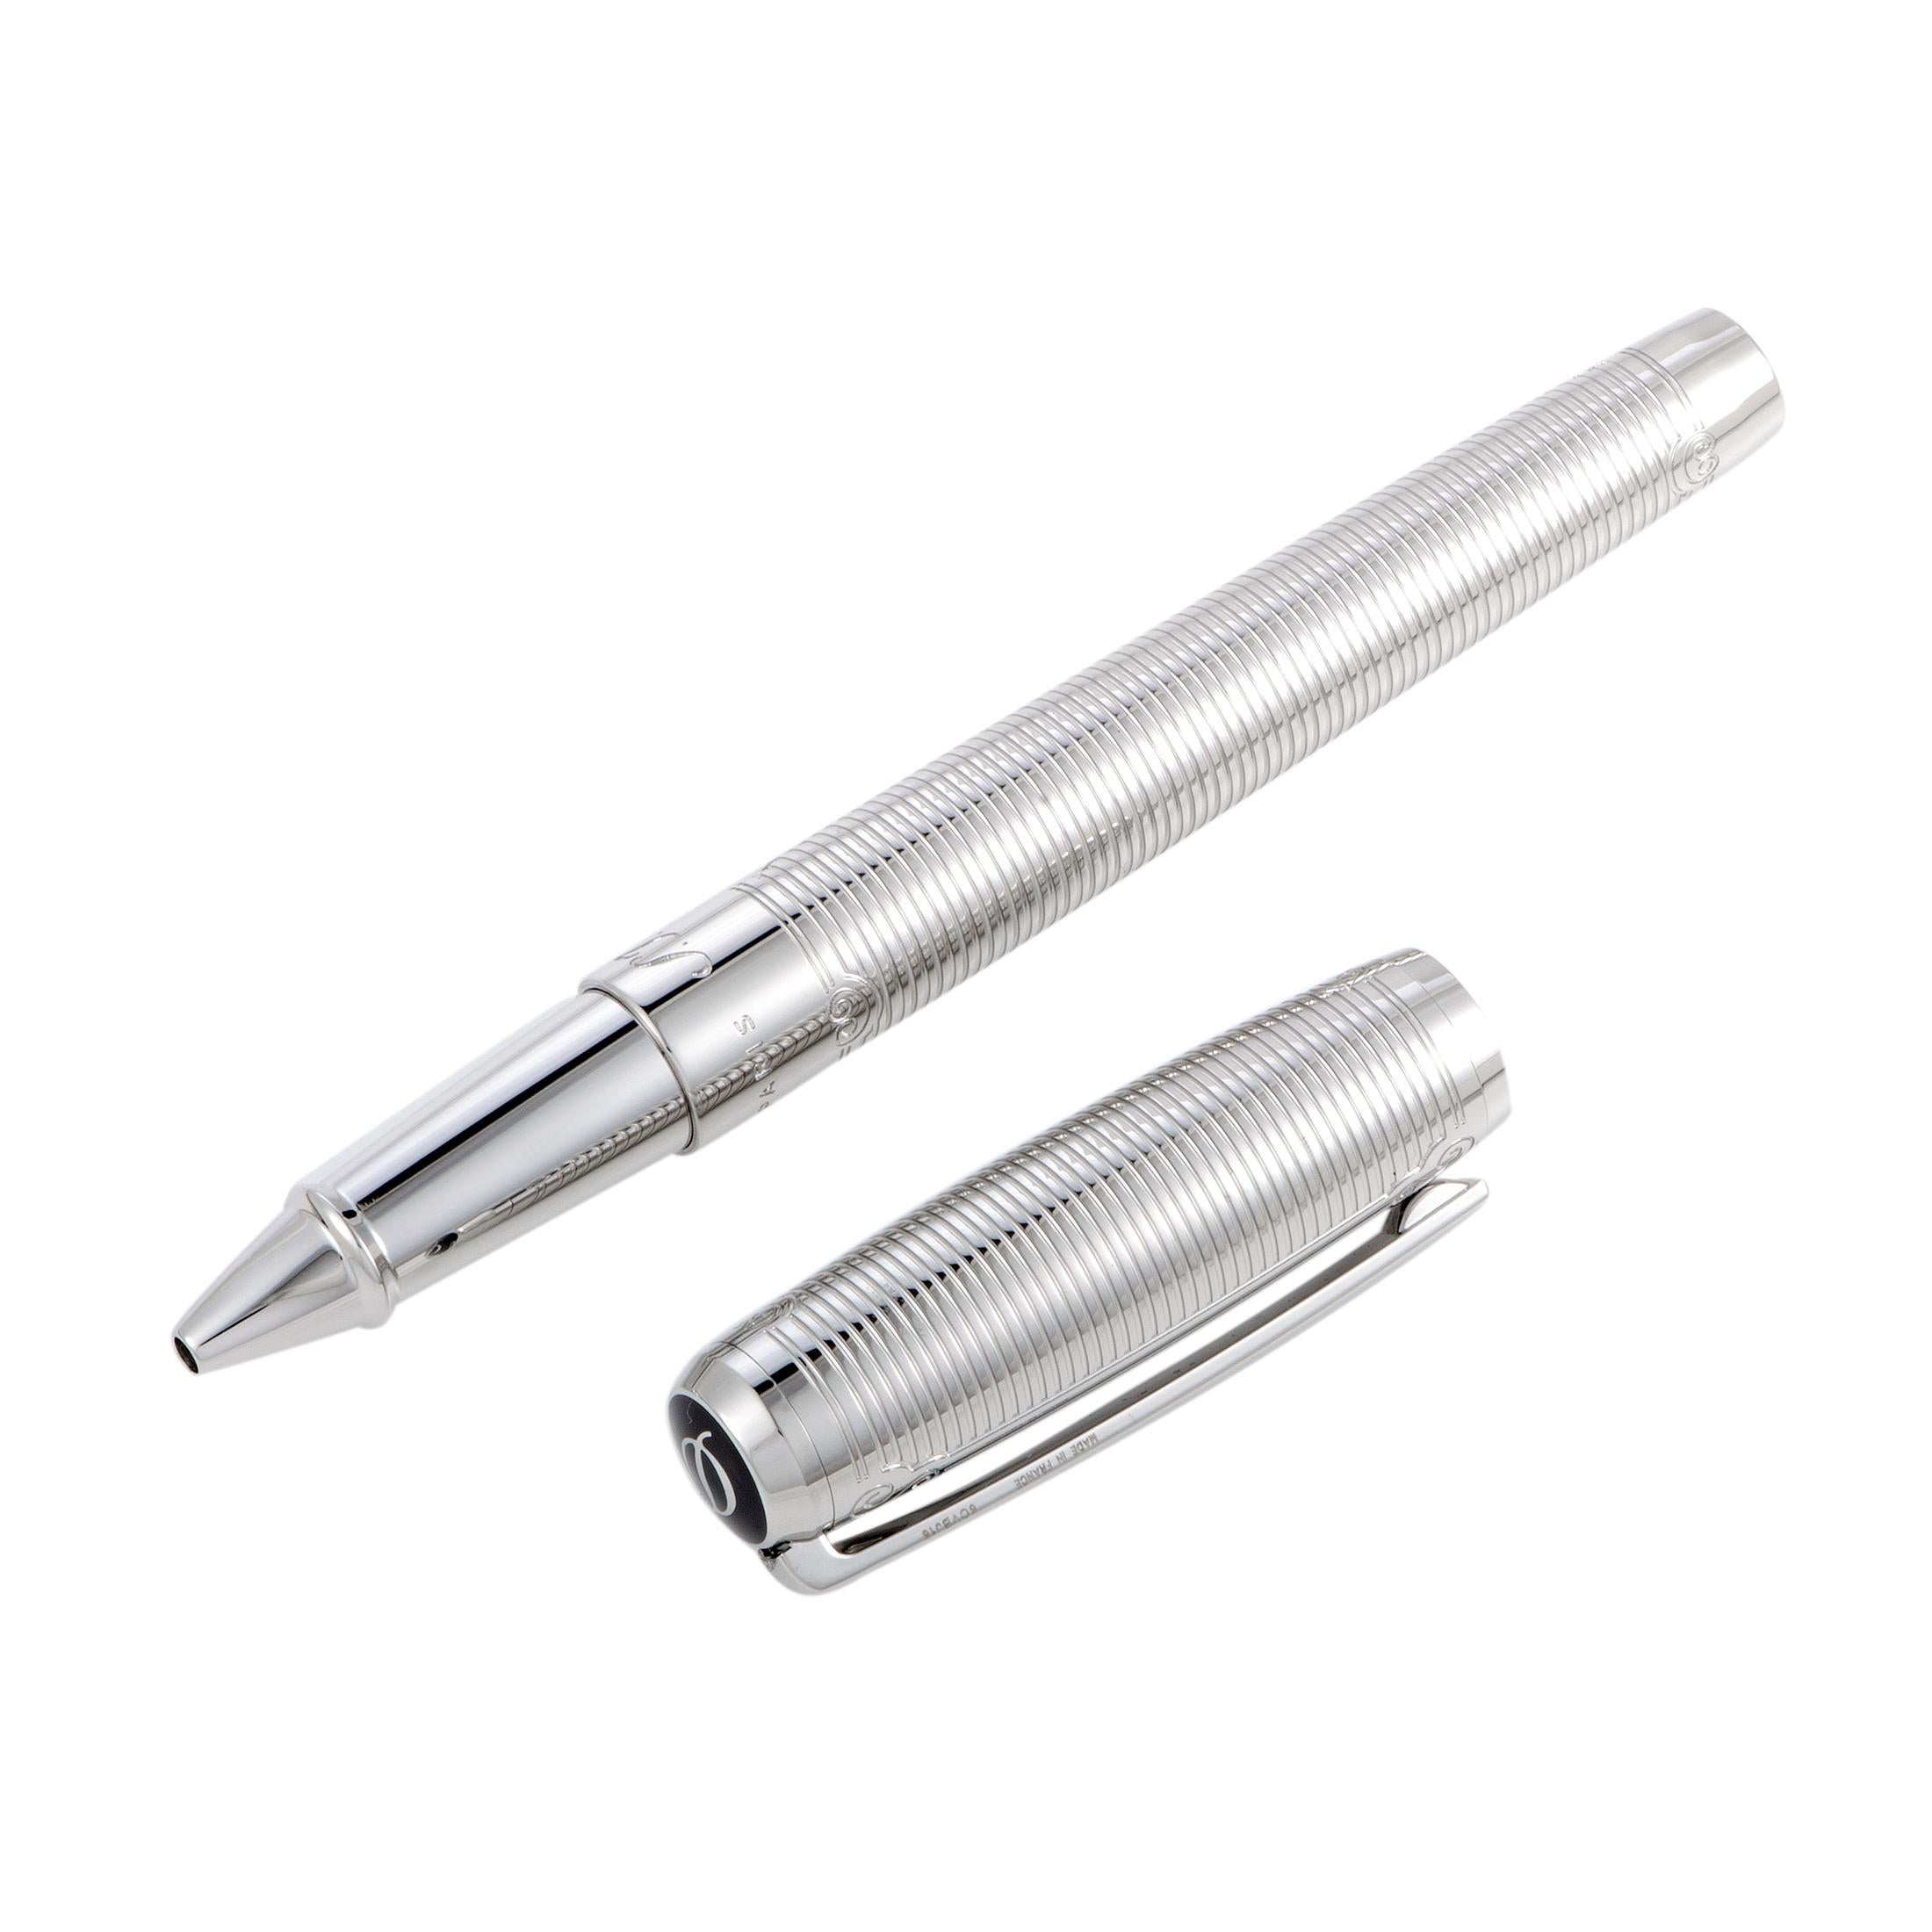 Embellished with a remarkably fine pattern in the brand’s classically tasteful style, this splendid rollerball pen from S.T. Dupont offers an appearance of utmost sophistication and timeless elegance while ensuring a fascinating level of quality.